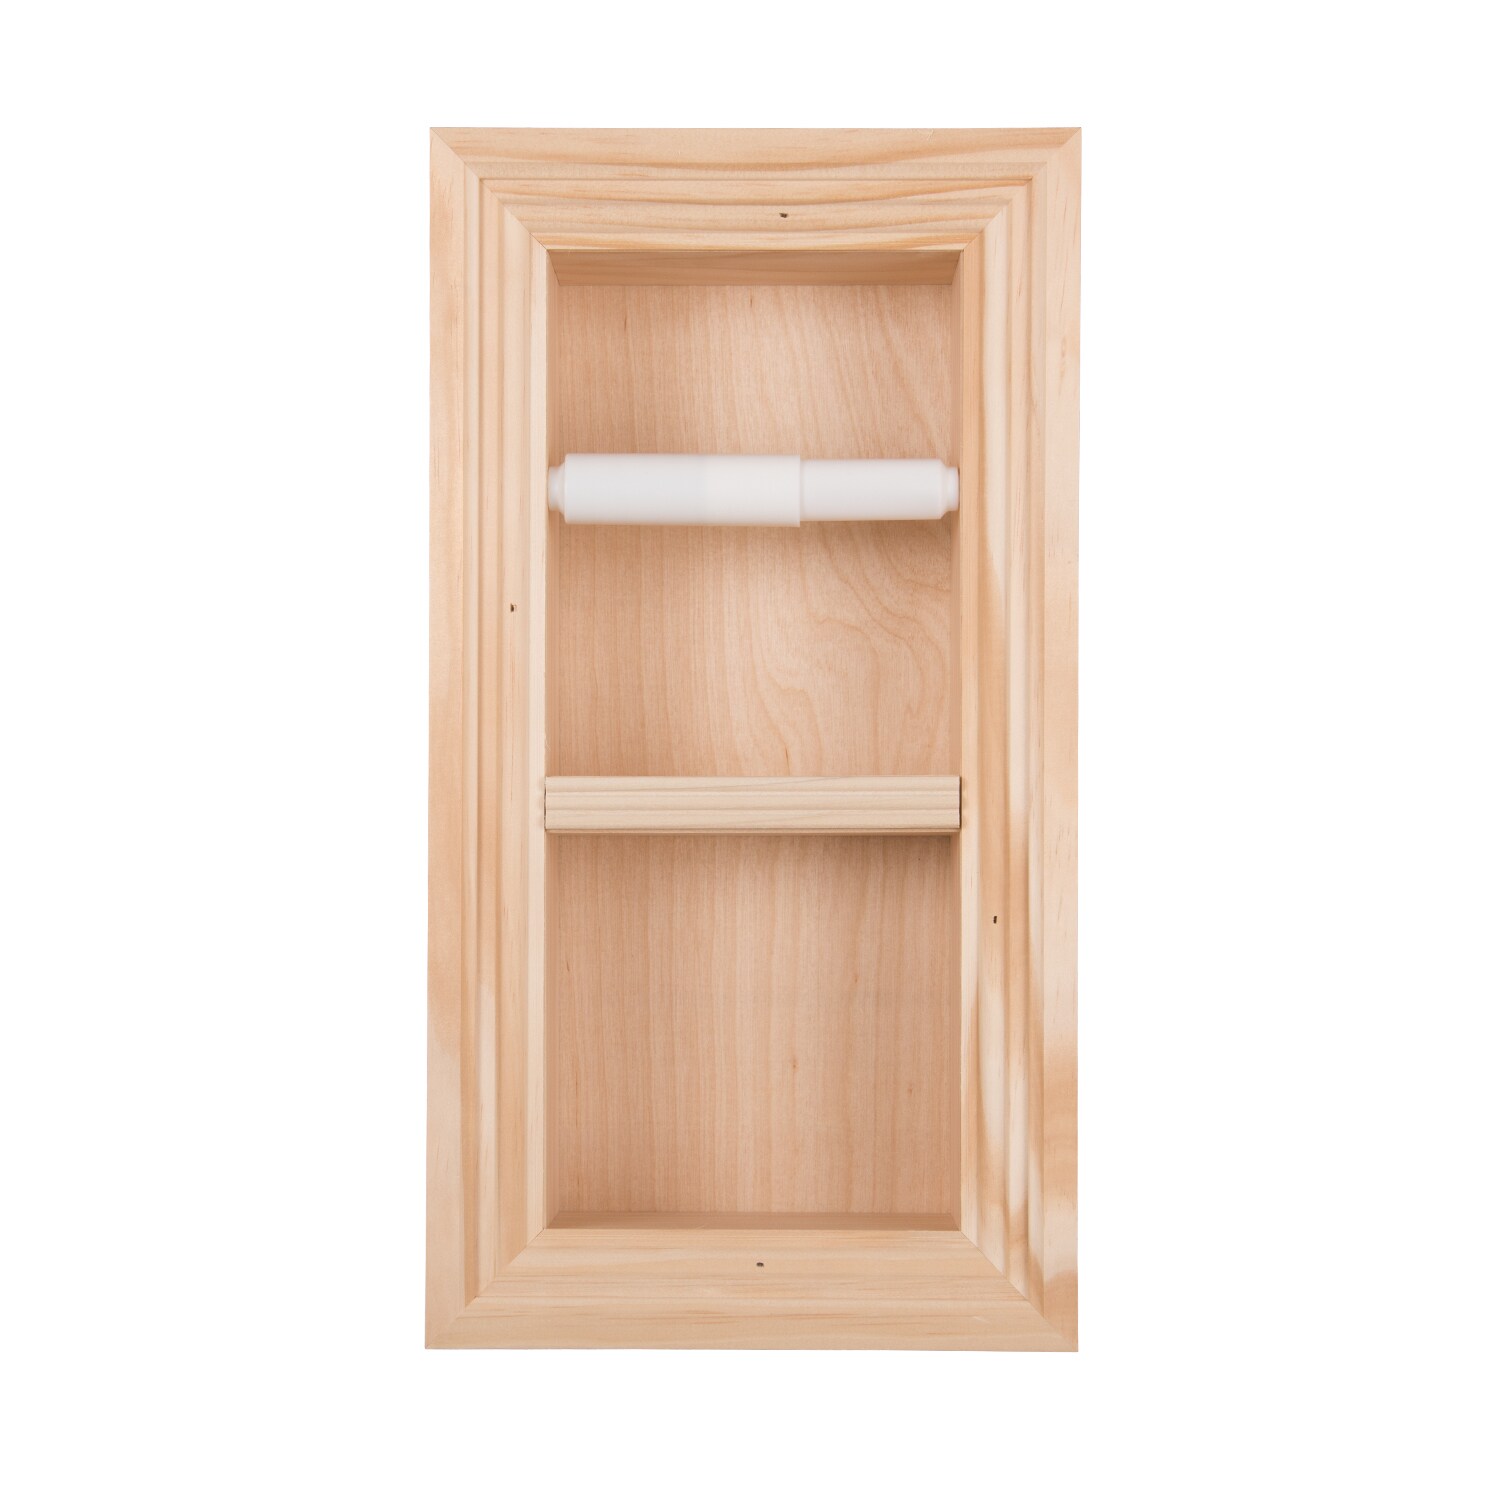 https://ak1.ostkcdn.com/images/products/16341067/Solid-Wood-Recessed-in-wall-Bathroom-Double-Toilet-Paper-Holder-Multiple-Finishes-5667a6ed-3ce8-4e4d-a3f2-40fbe898cc9a.jpg